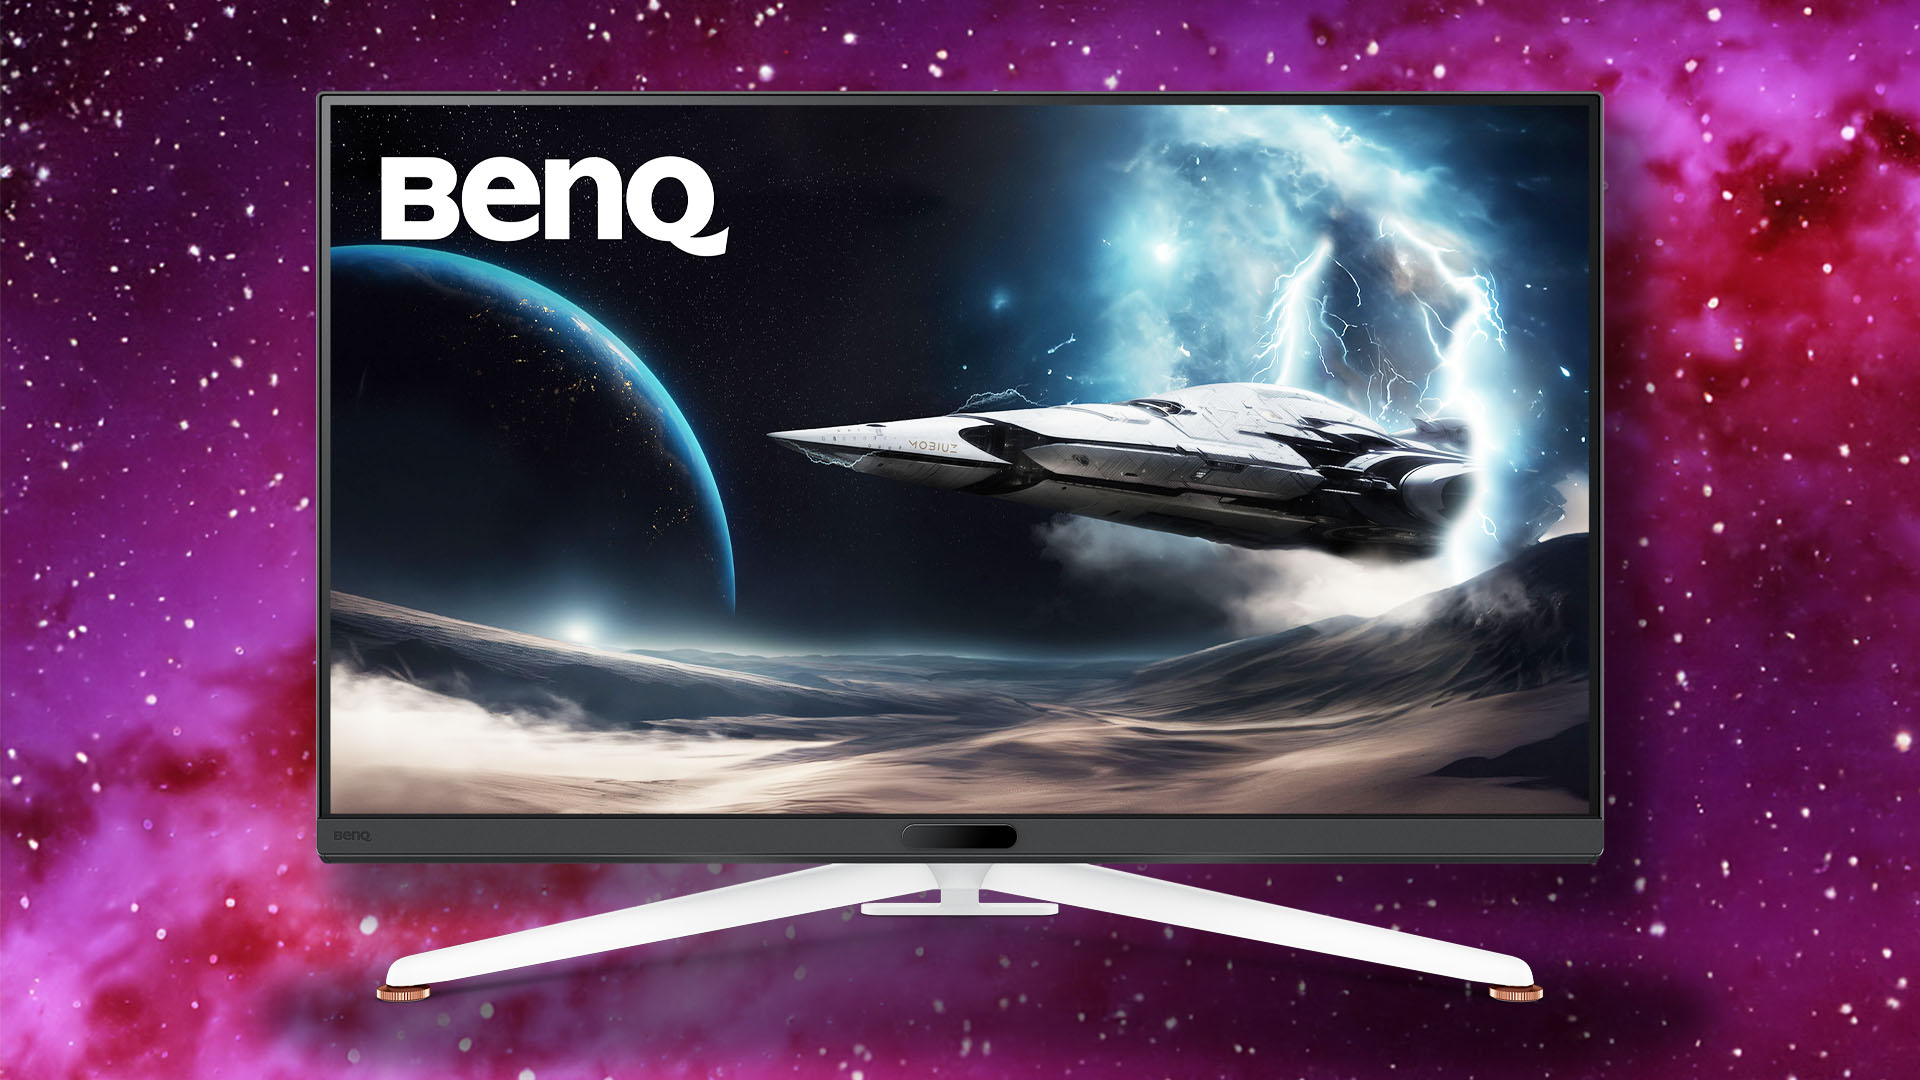 BenQ's new 4K miniLED gaming monitor helps you see in the dark